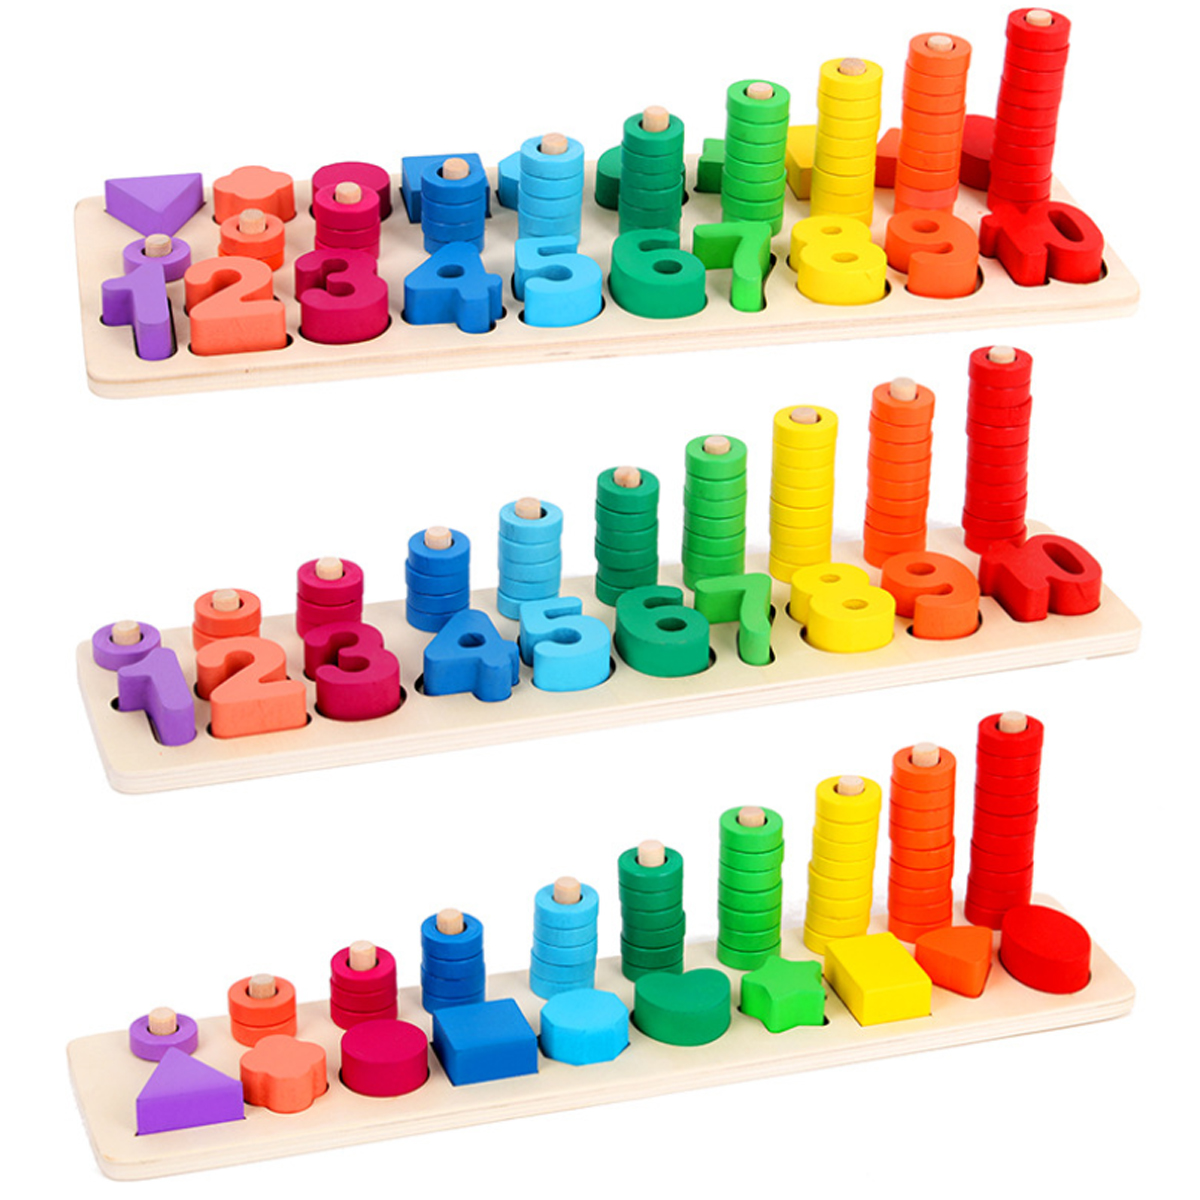 Wooden-Math-Toy-Board-Montessori-Counting-Board-Preschool-Learning-Toys-for-Children-Gifts-1629382-2